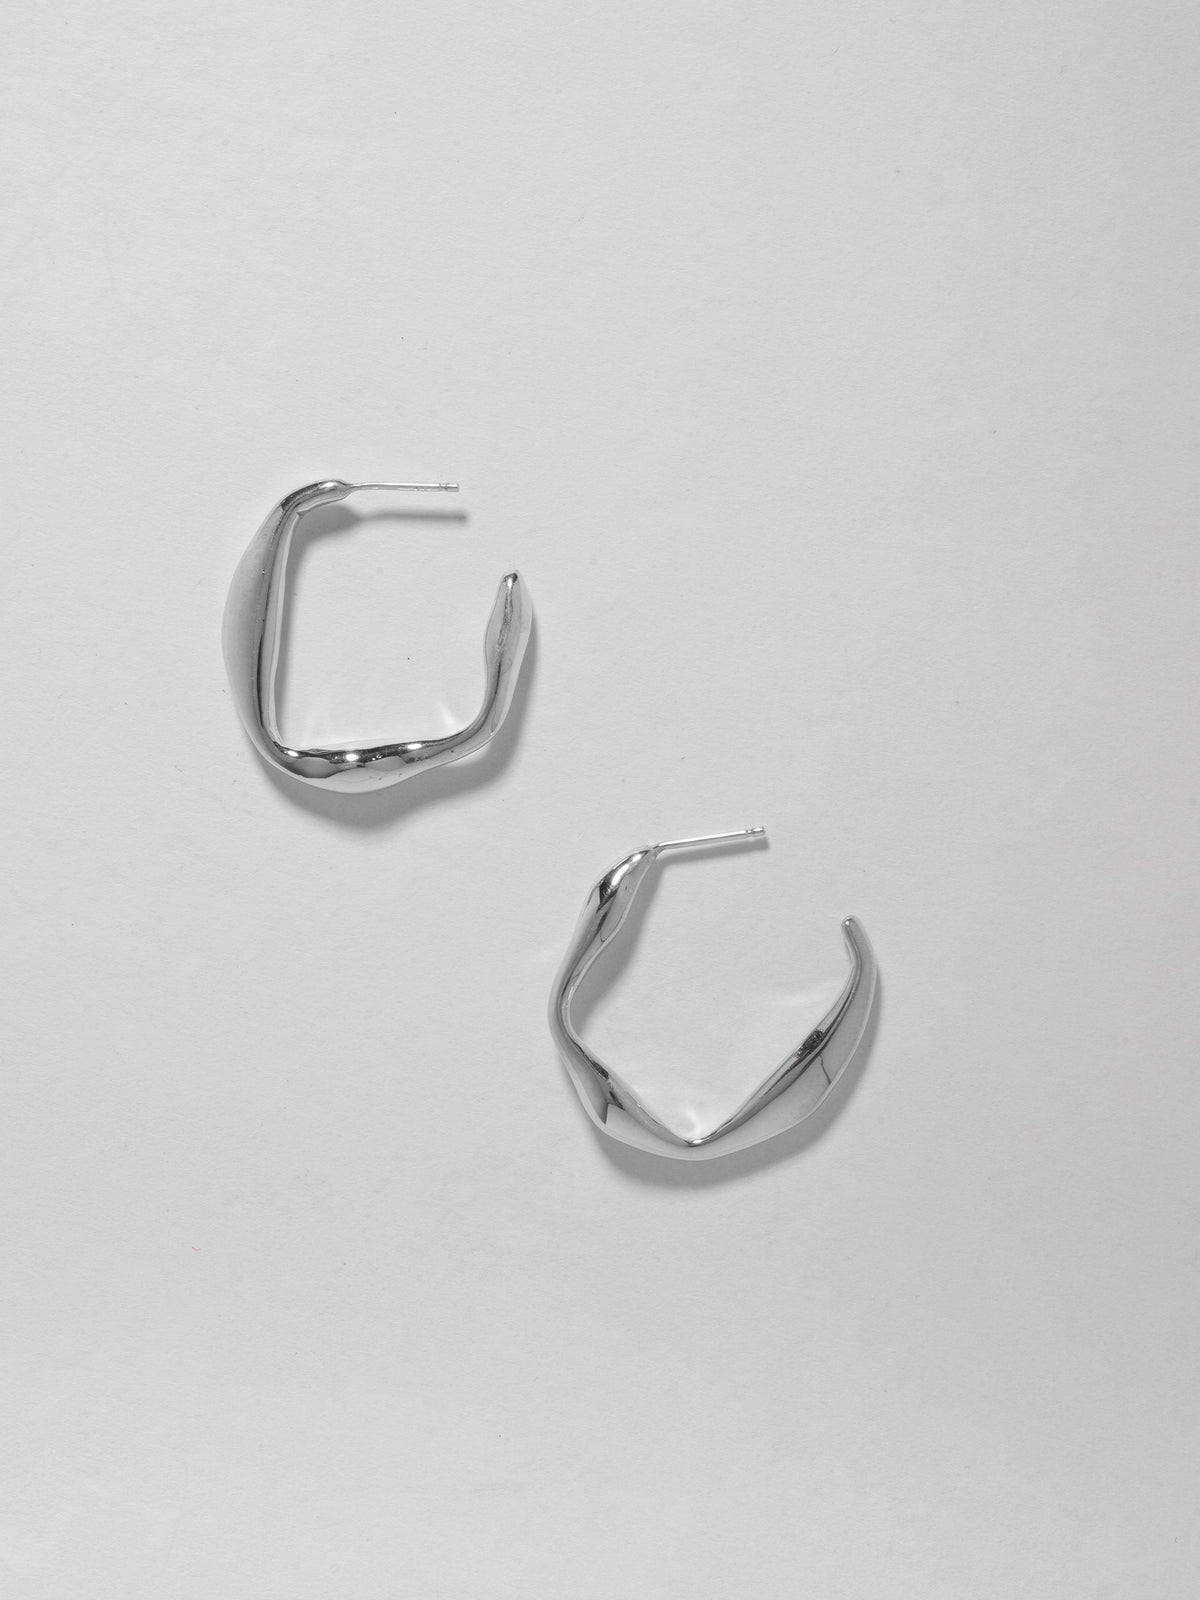 Product image of FARIS ONDA Hoop Small in sterling silver. Hoops shown side by side, staggered